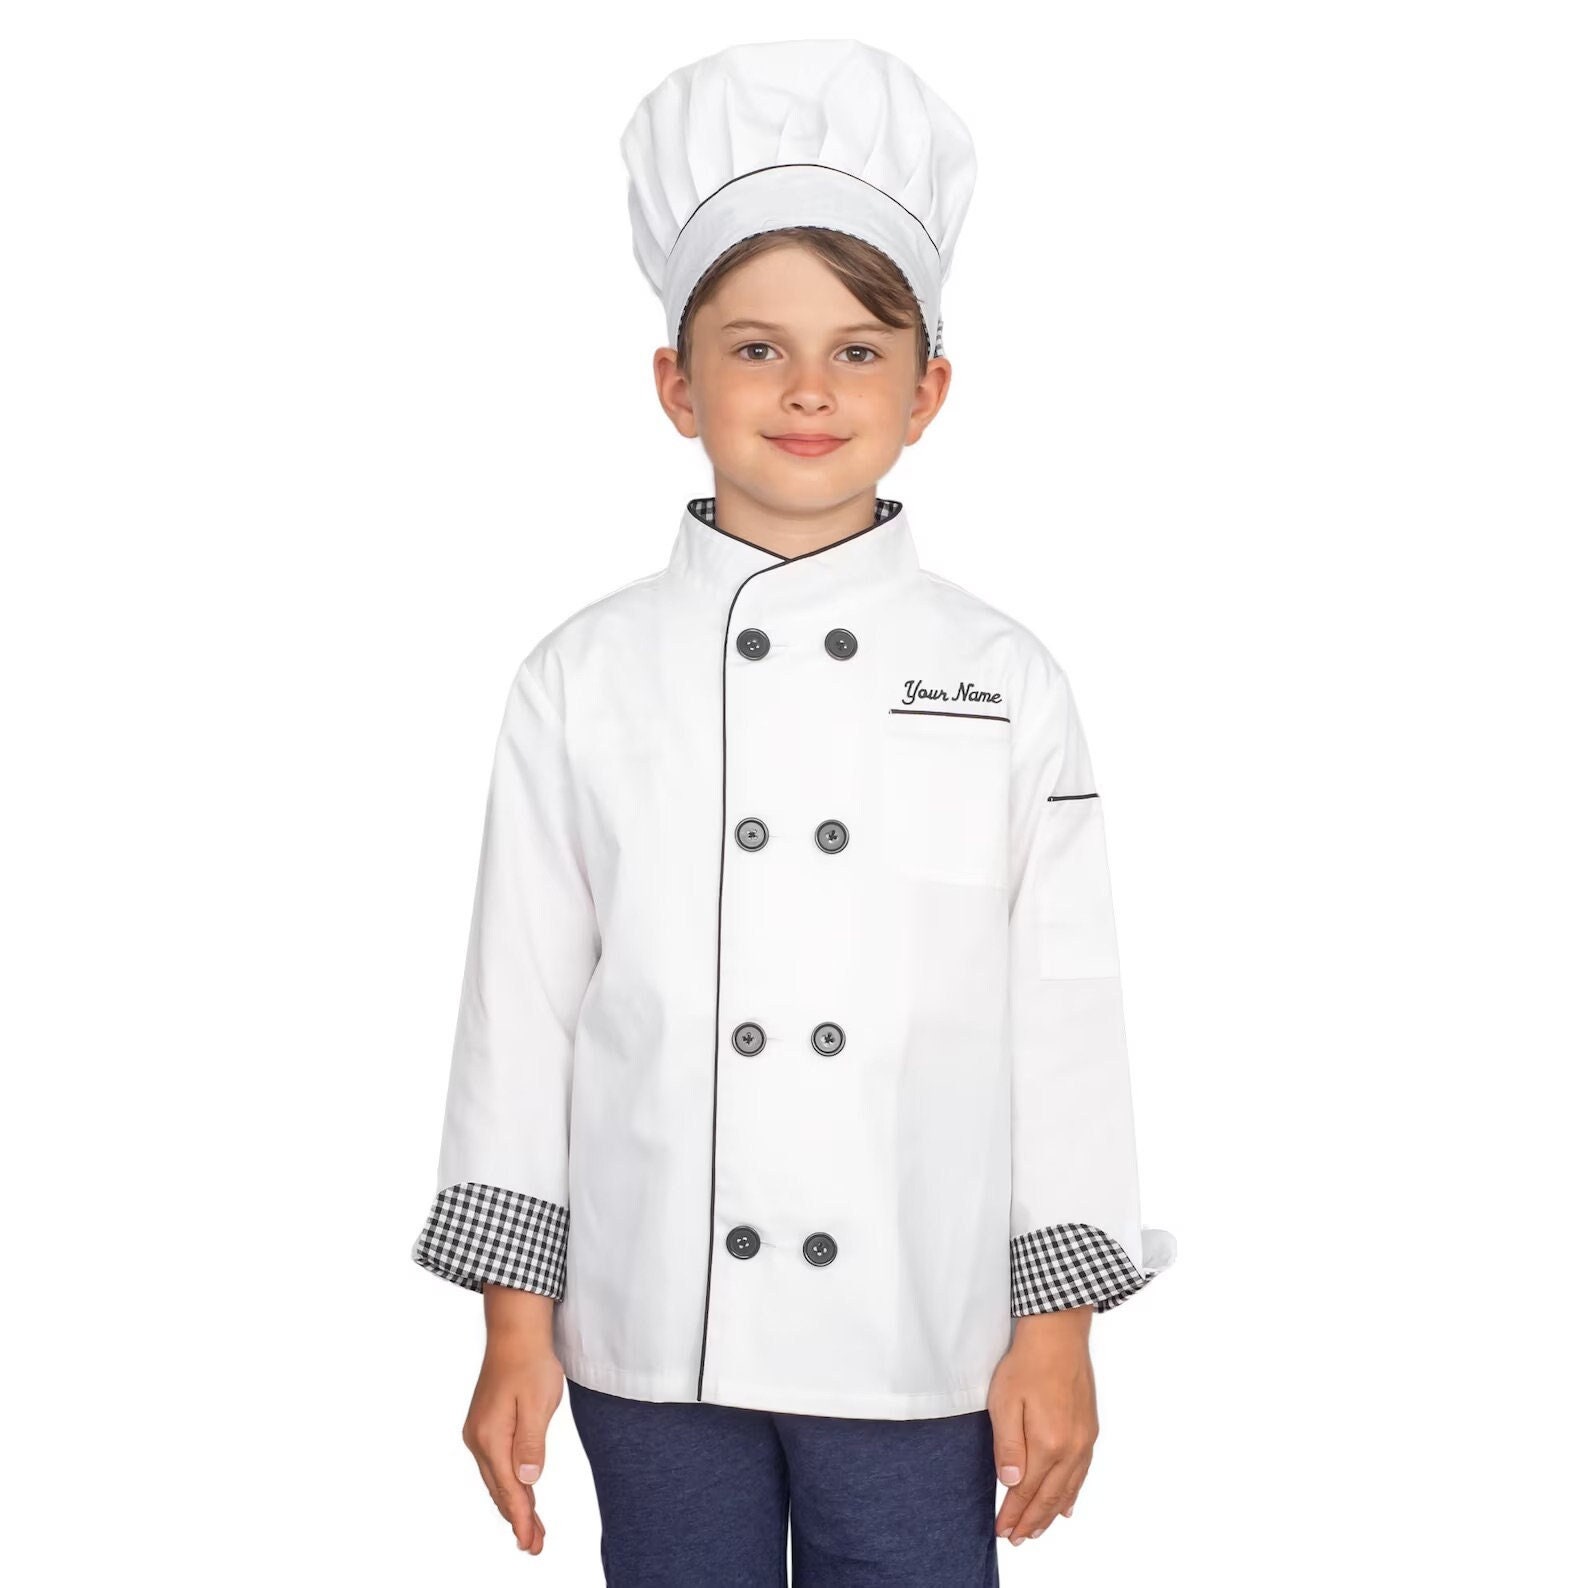 Vanmor Kids Basic Cooking and Baking Set, 26 Pcs Kids Baking Sets with Kids  Chef Hat and Apron for Girls Boys Toddler Dress Up Chef Costume Career